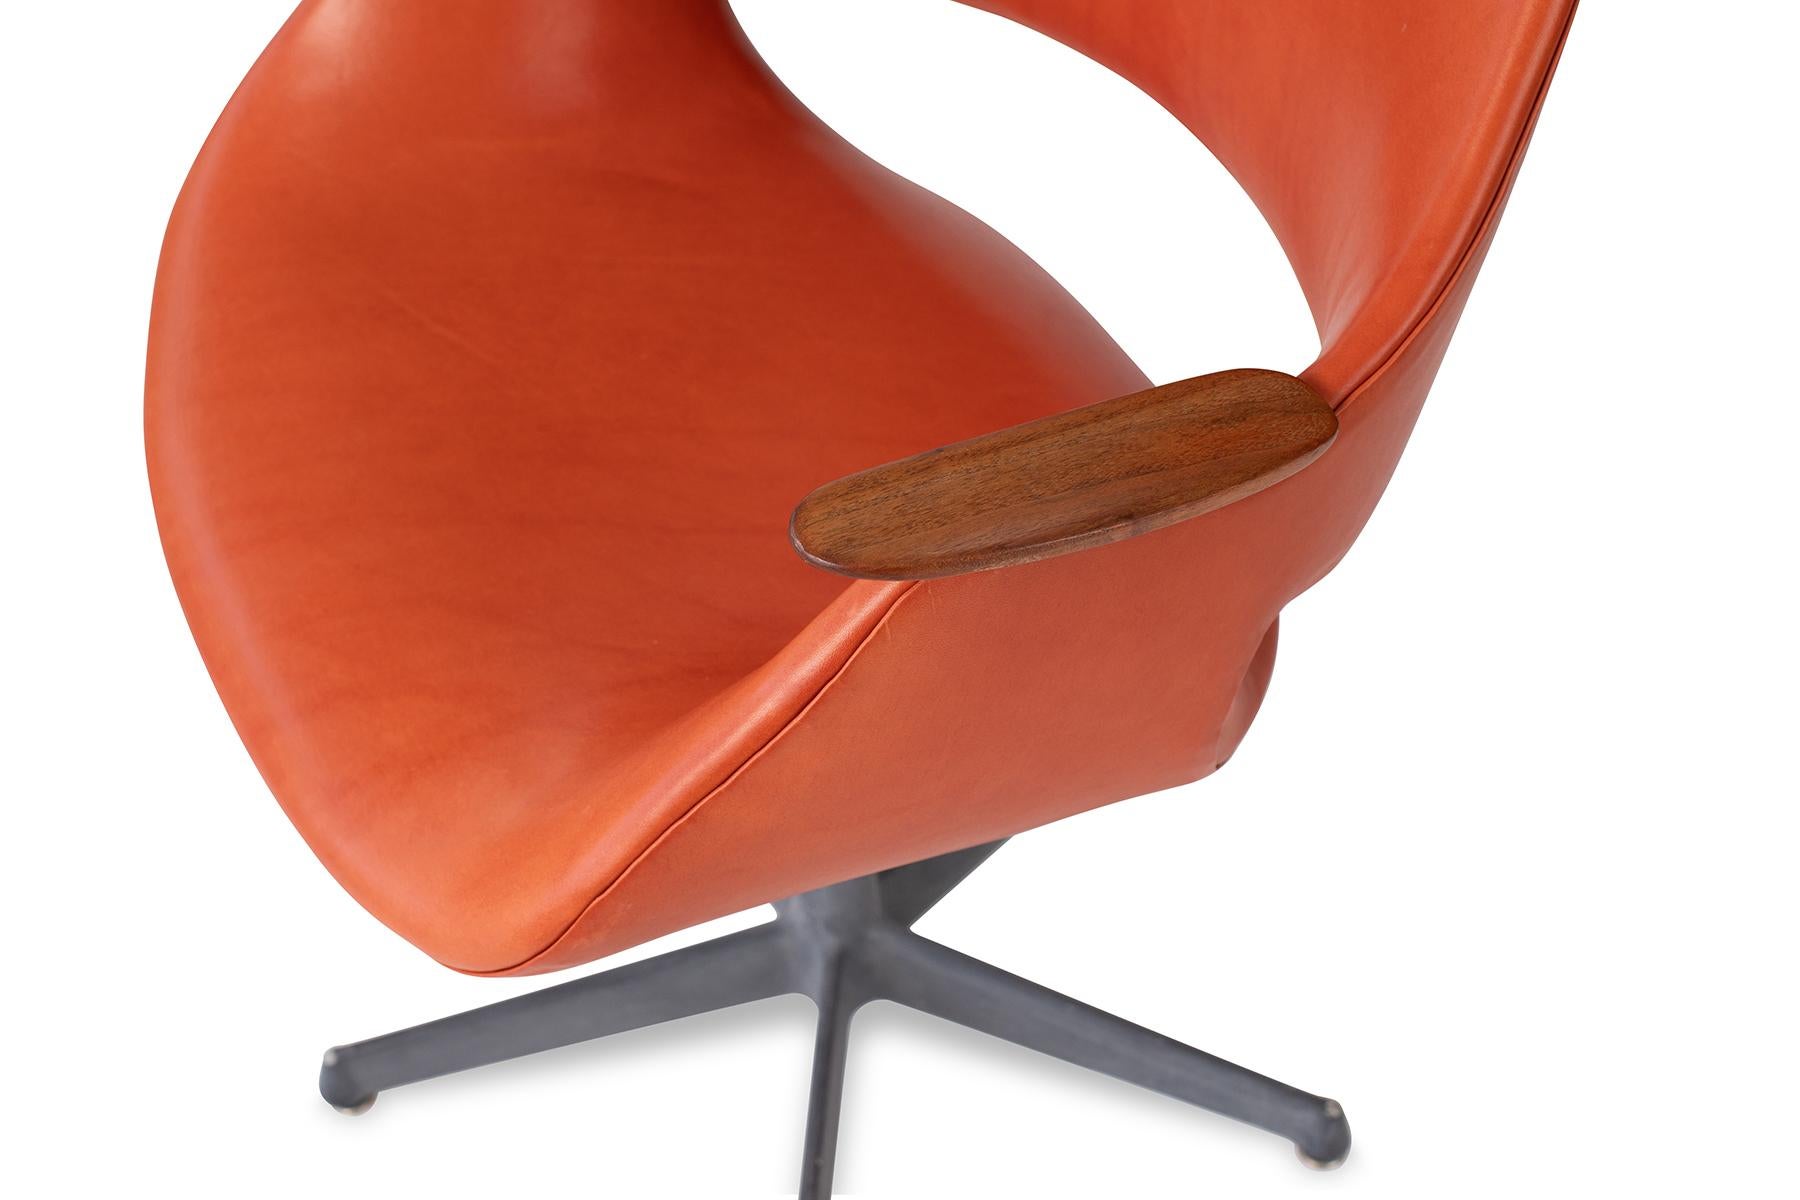 Arthur Umanoff leather steel and walnut chair, circa late 1960s. This example has been newly upholstered in a persimmon leather and the walnut arms refinished. Metal base retains patina. Size: Arm height is 25